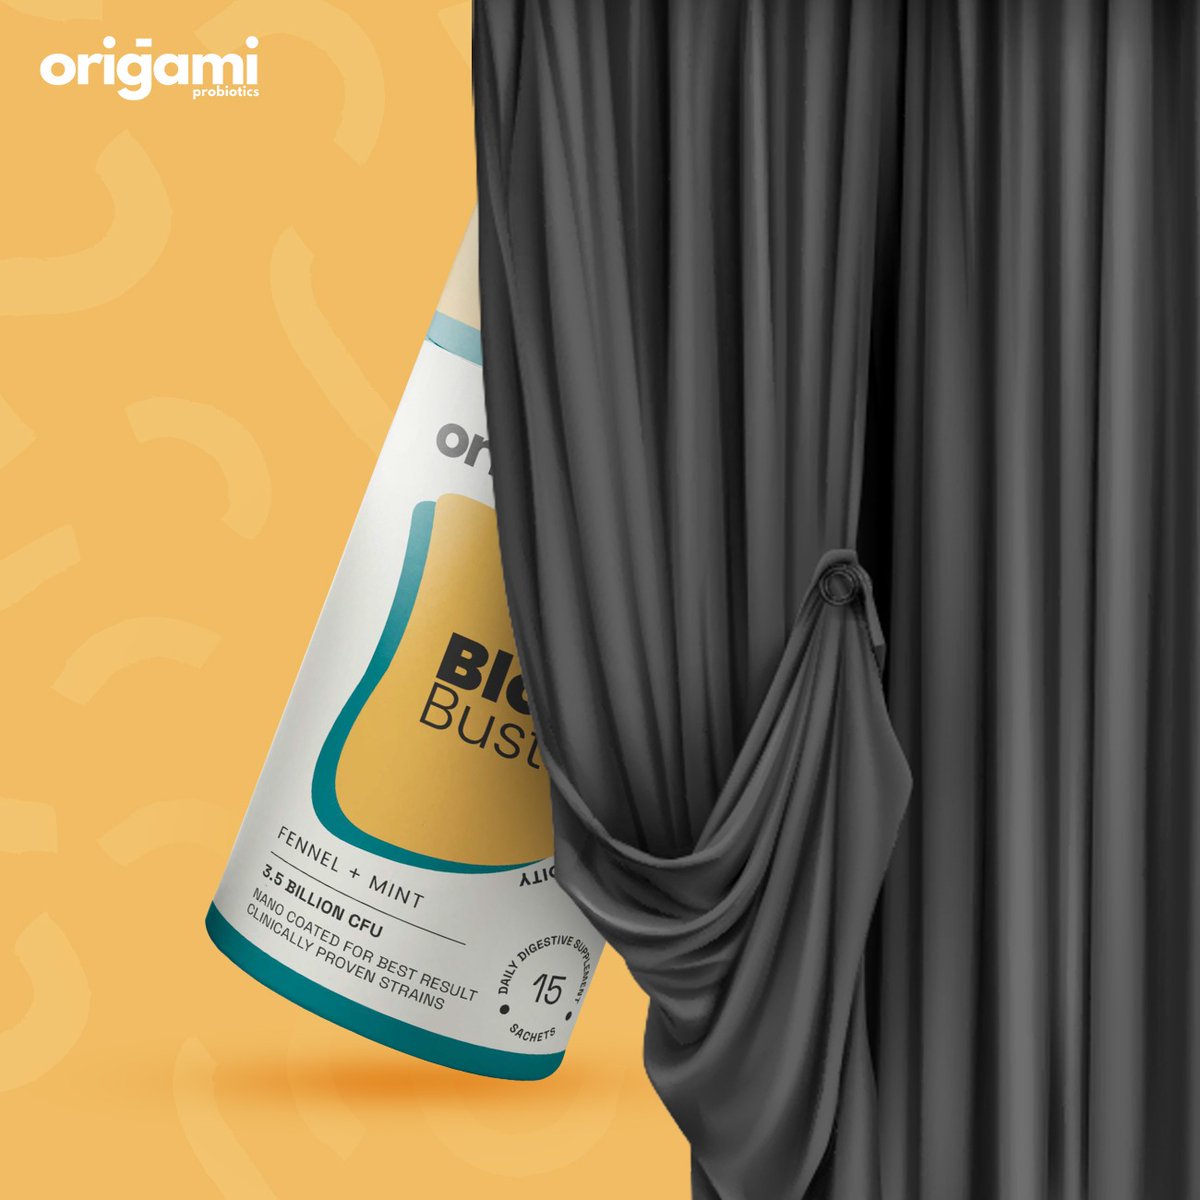 Pull back the curtain on gut health!
Peek behind the scenes and discover the probiotic wonder waiting to delight your taste buds. Get ready to savor wellness, one curtain pull at a time! 🍽️💫 #GutHealth #Probiotics #CurtainMagic #GutHealing #ProbioticStrains #Probiotics #GutLove